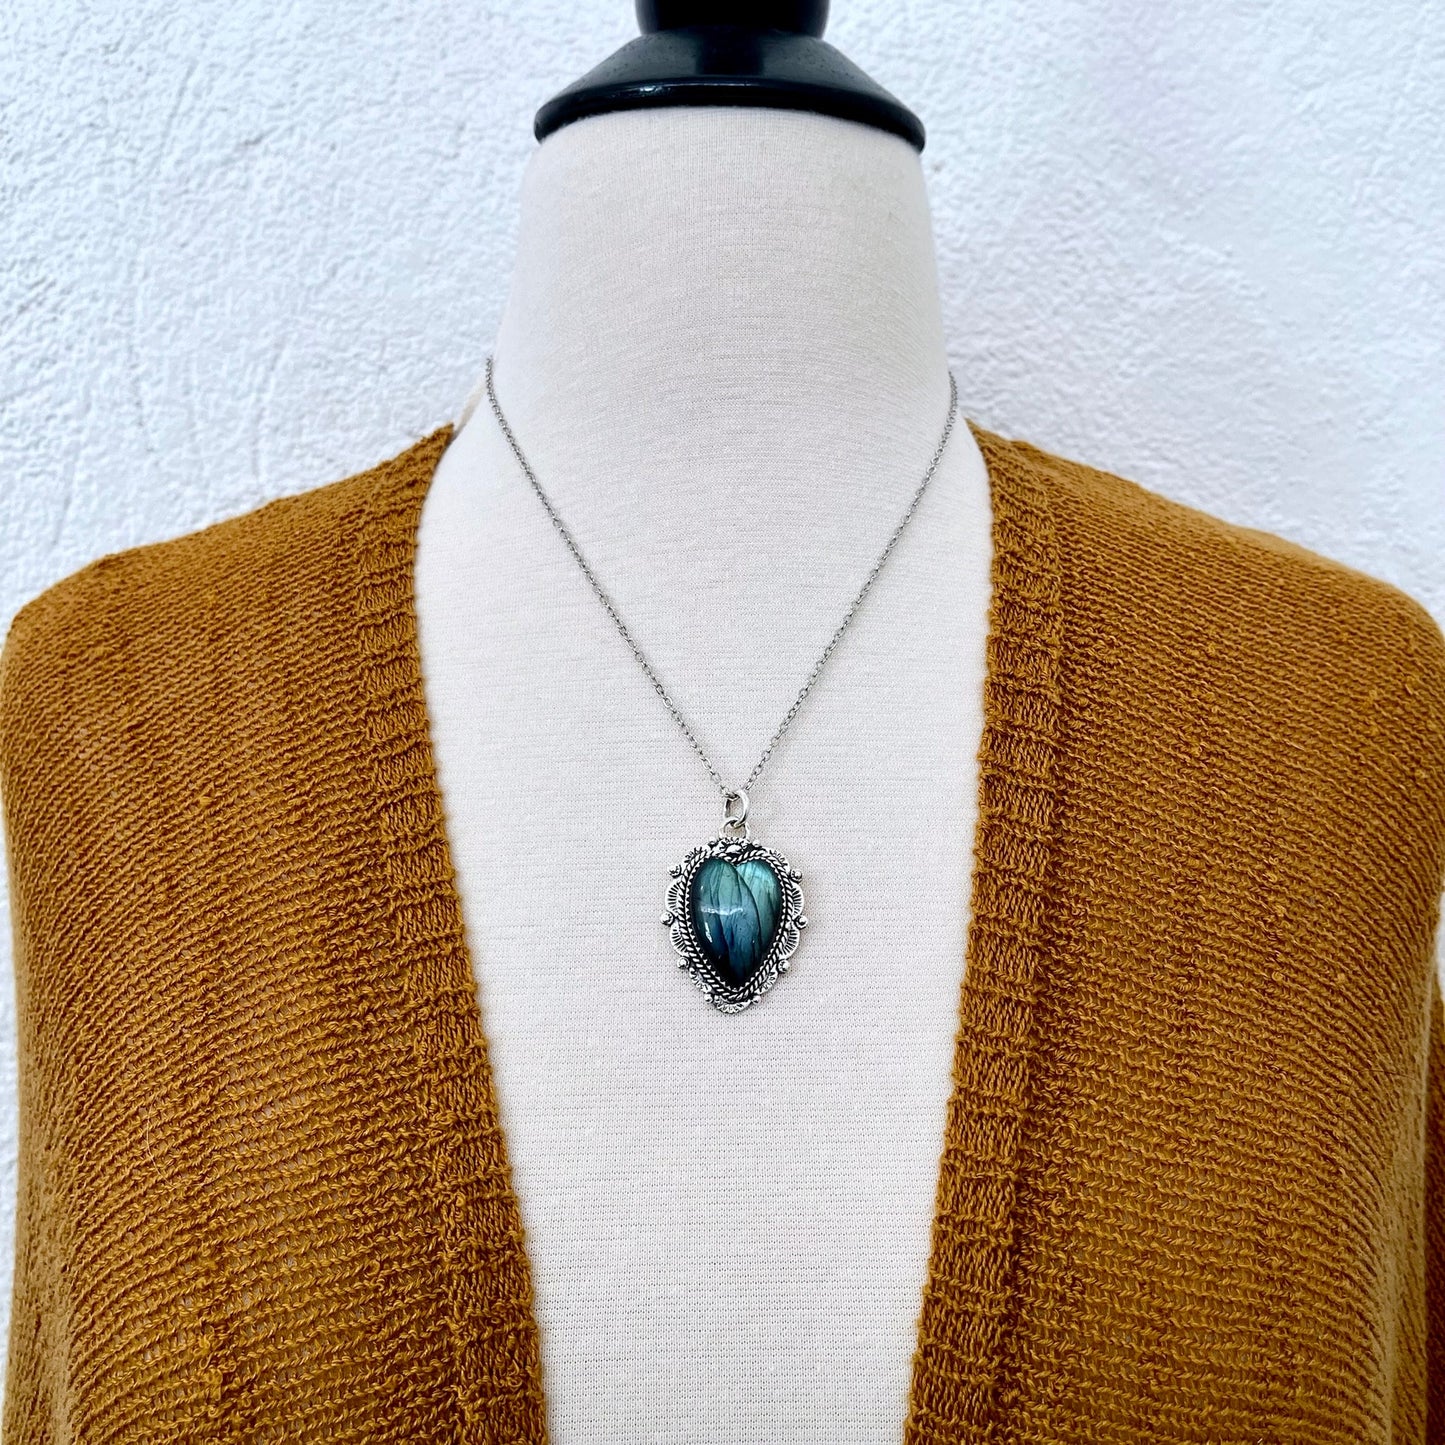 Blue Labradorite Crystal Heart Necklace in Sterling Silver -Designed by FOXLARK Collection